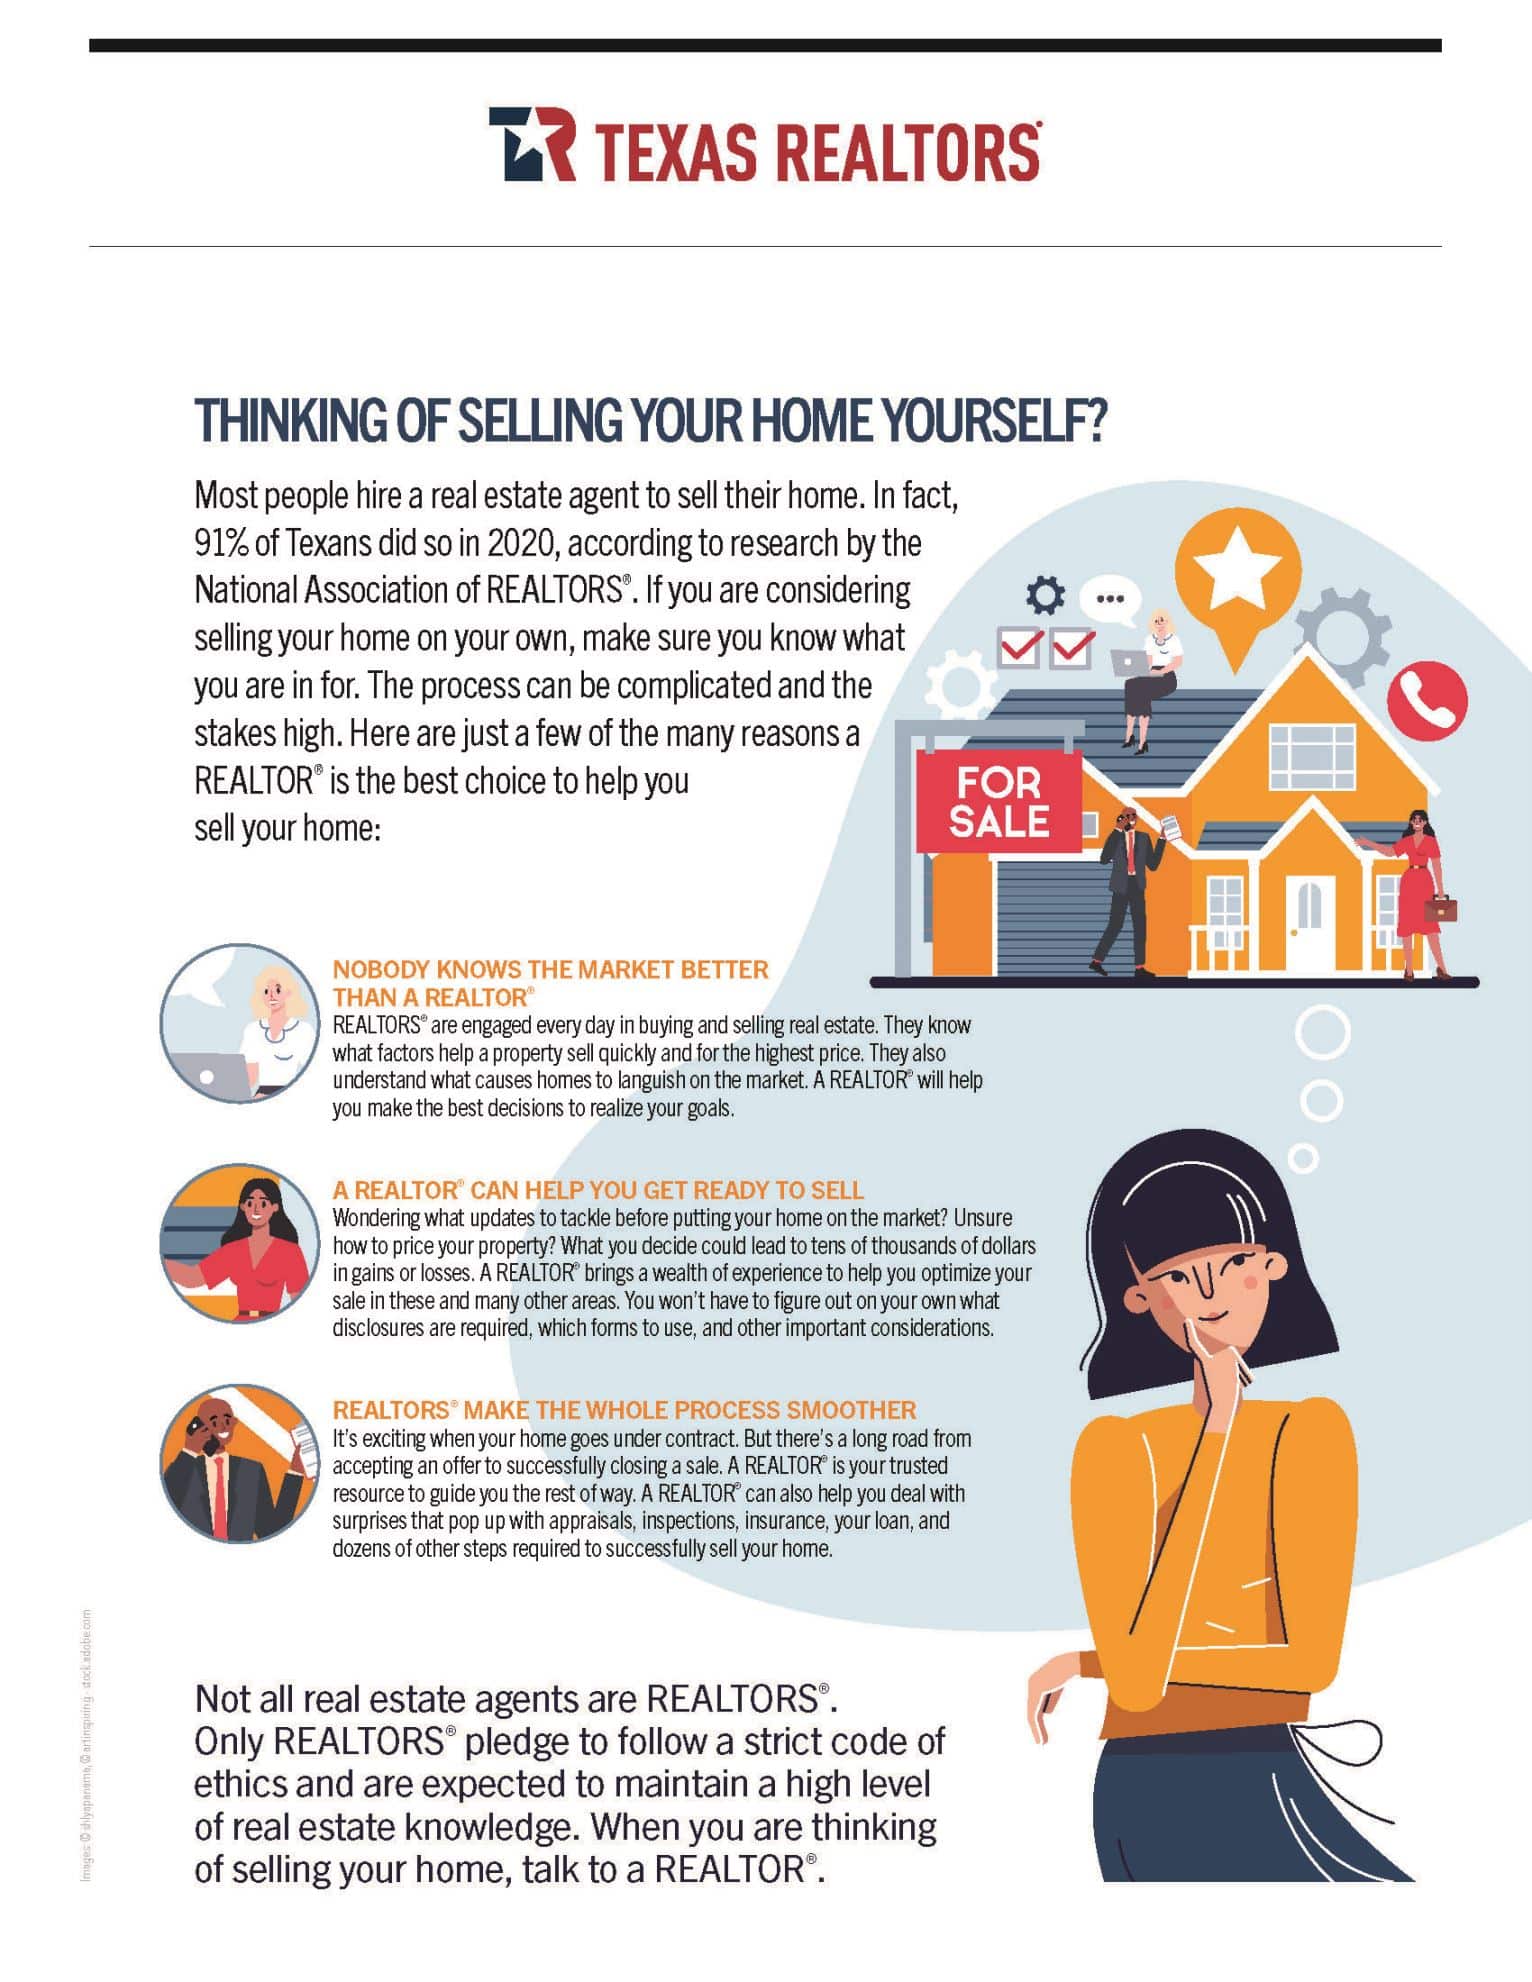 Thinking of Selling Your Home Yourself